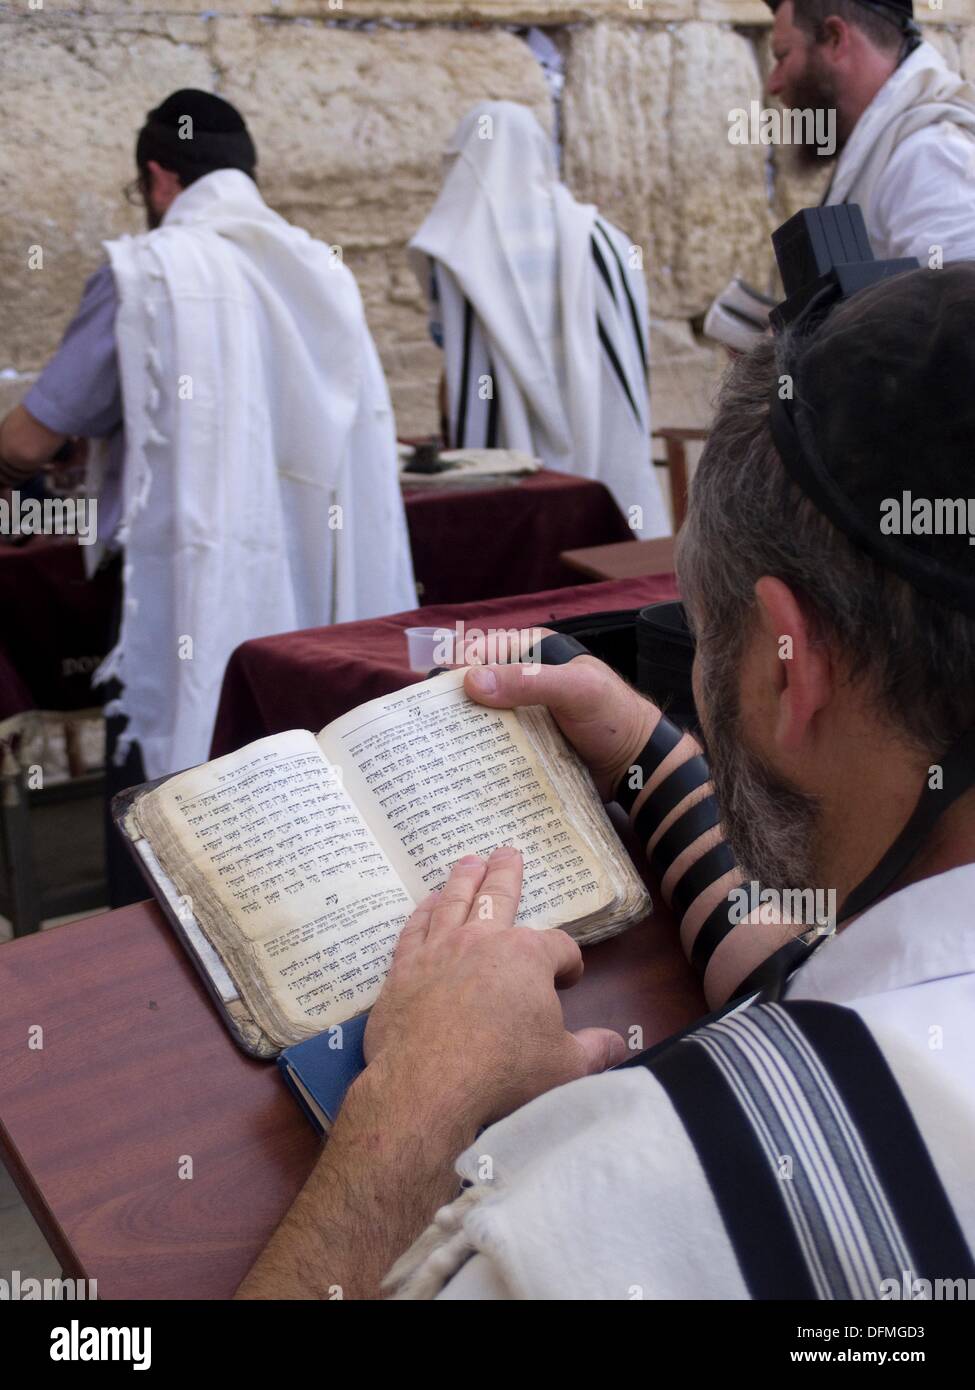 Observant Jews pray at the Western Wall, the holiest shrine in the Jewish faith in Jerusalem, Israel Stock Photo